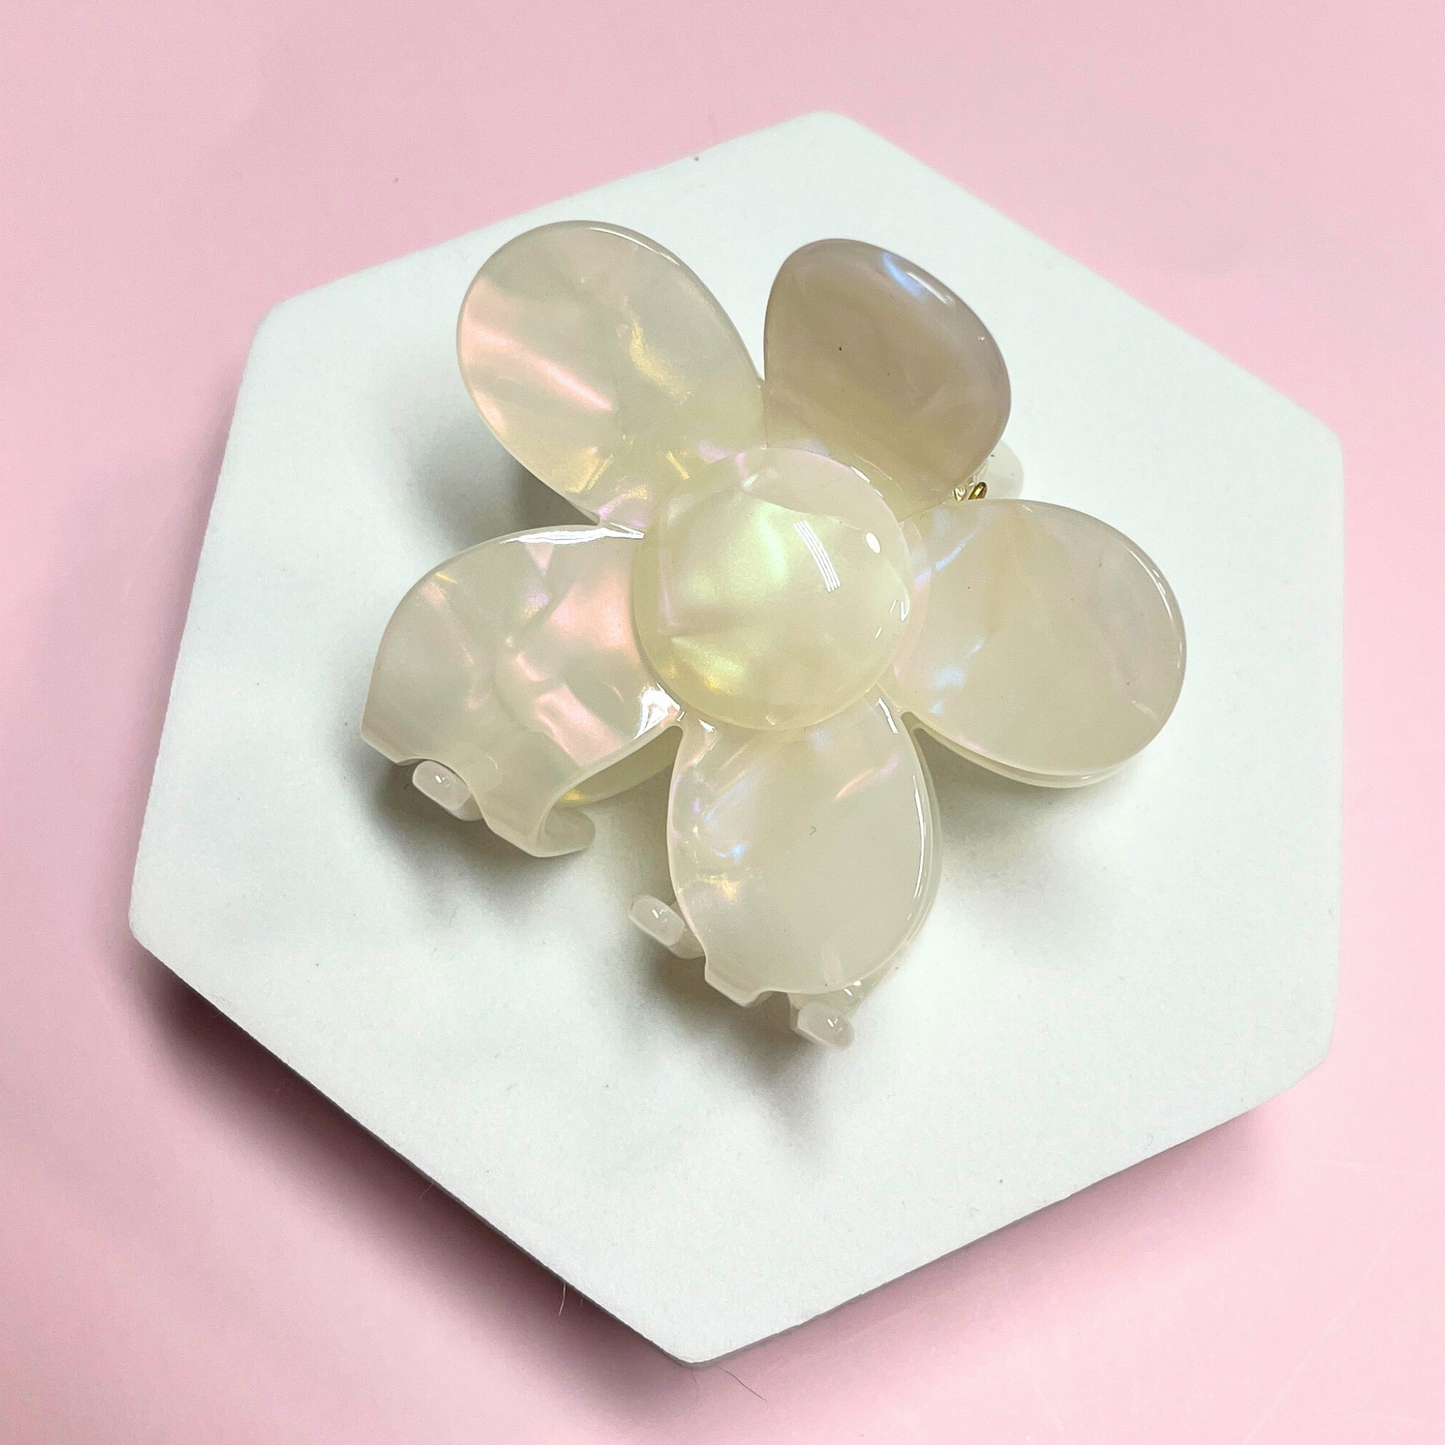 Hana Cellulose Acetate Hair Claw Clips